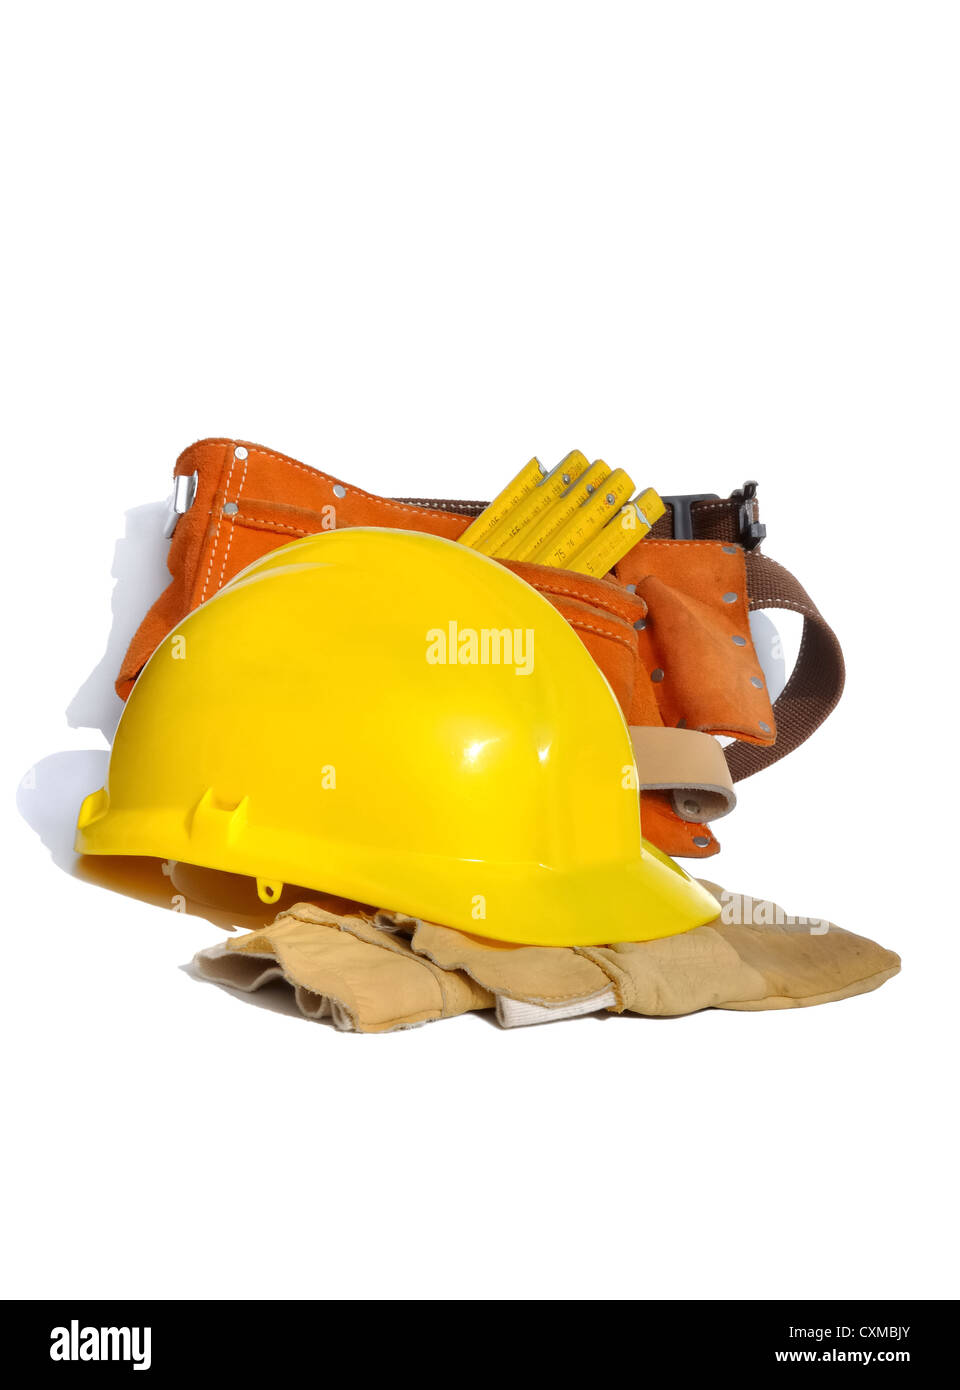 yellow construction helmet, gloves and belt tools on white background Stock Photo